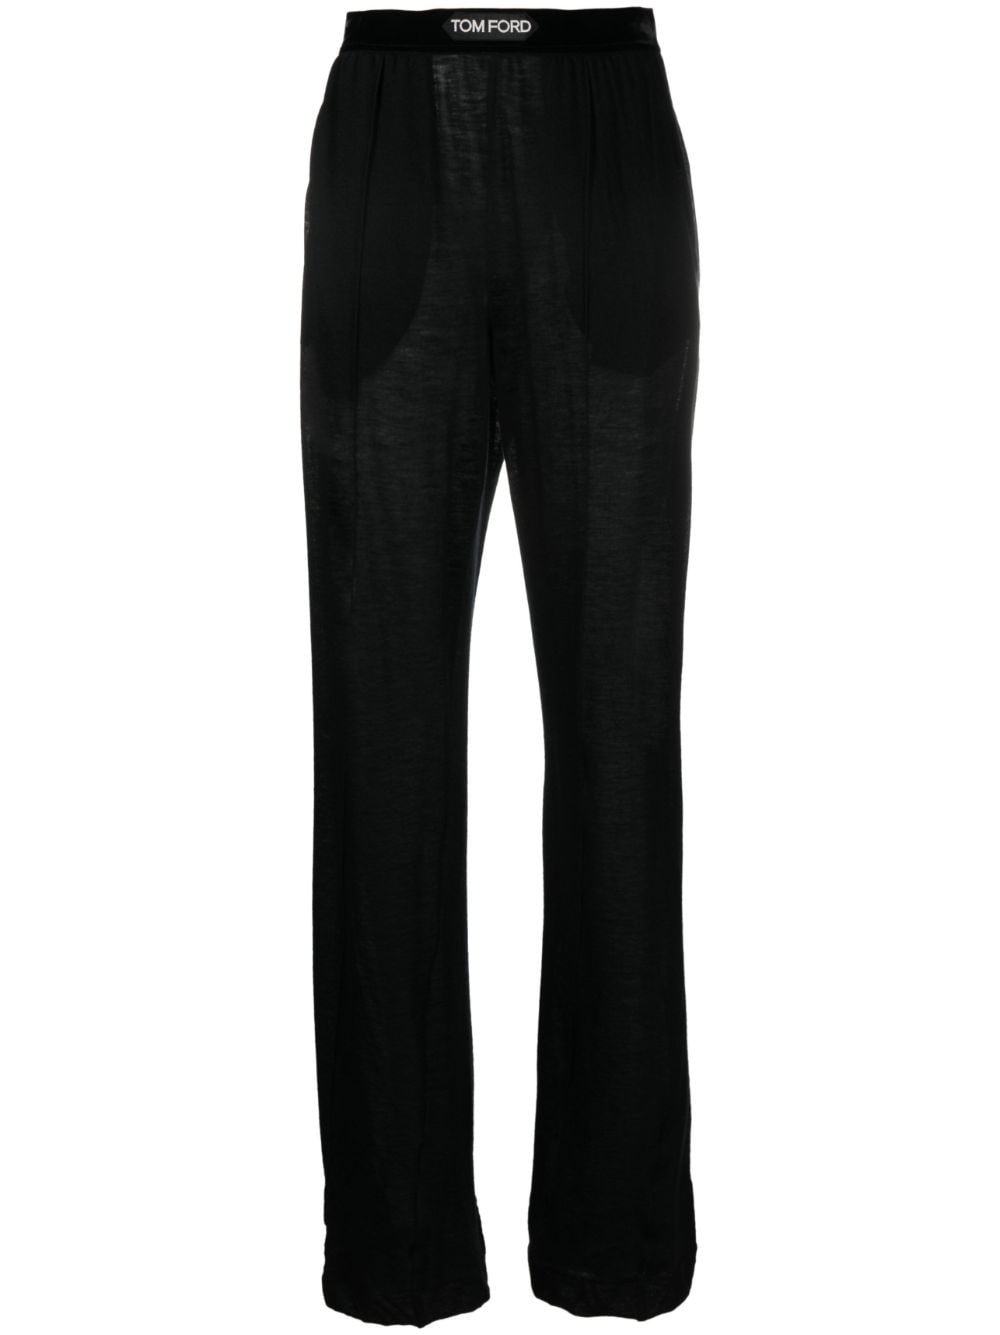 TOM FORD: Black Pinched Seam Lounge Pants